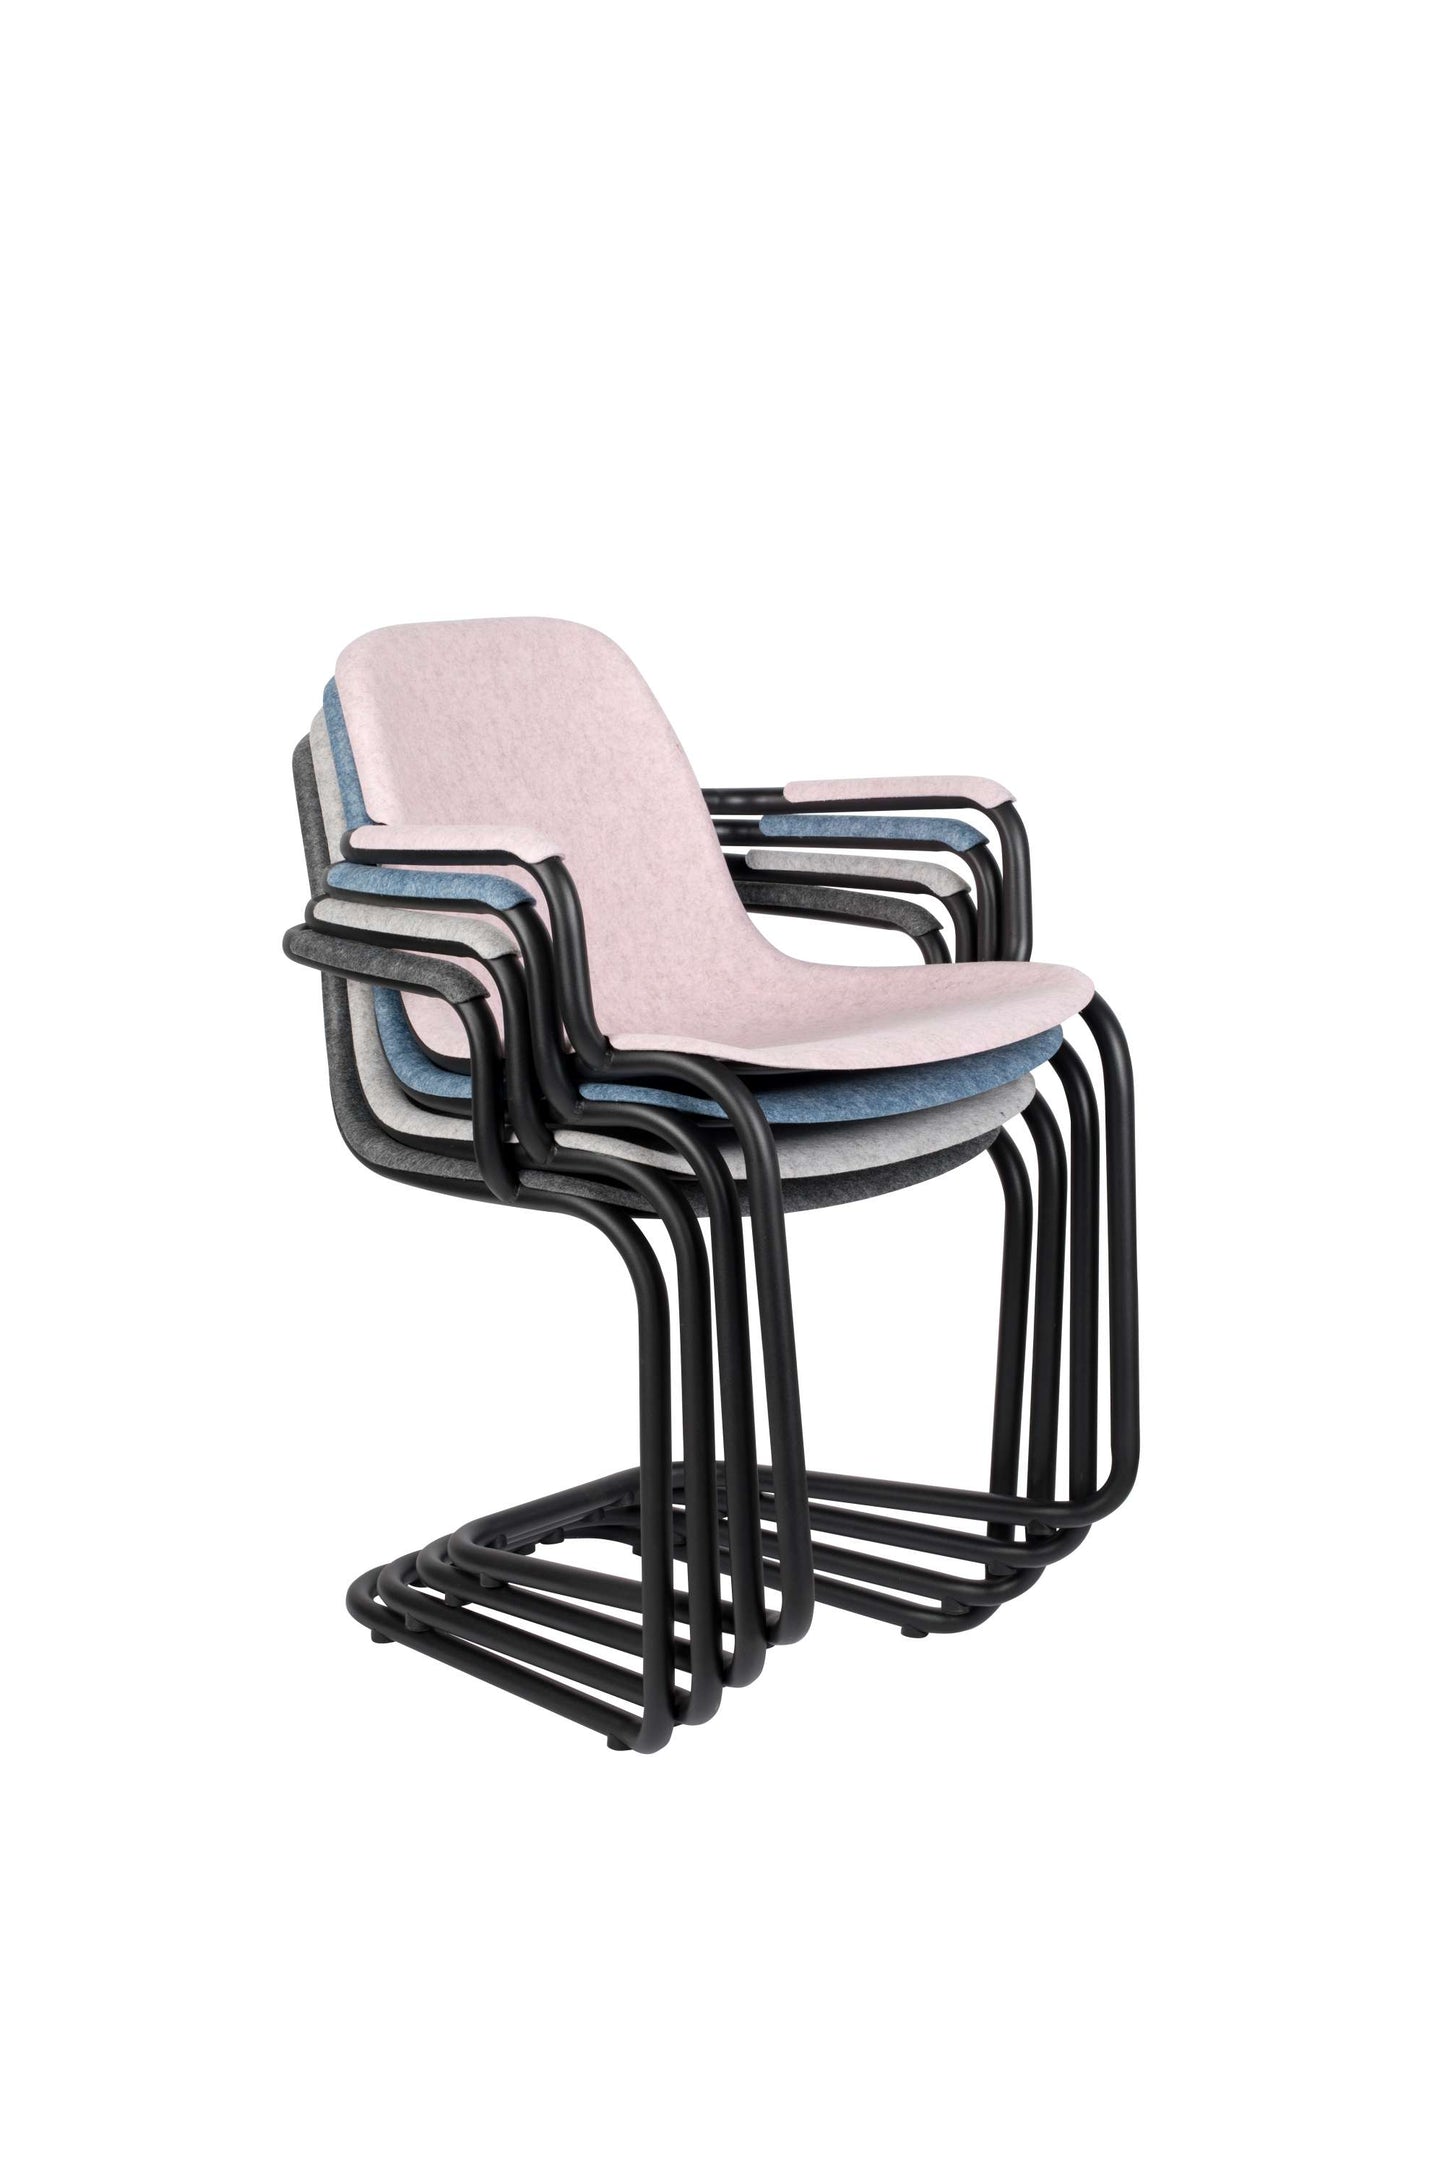 Zuiver | ARMCHAIR THIRSTY SOFT PINK Default Title